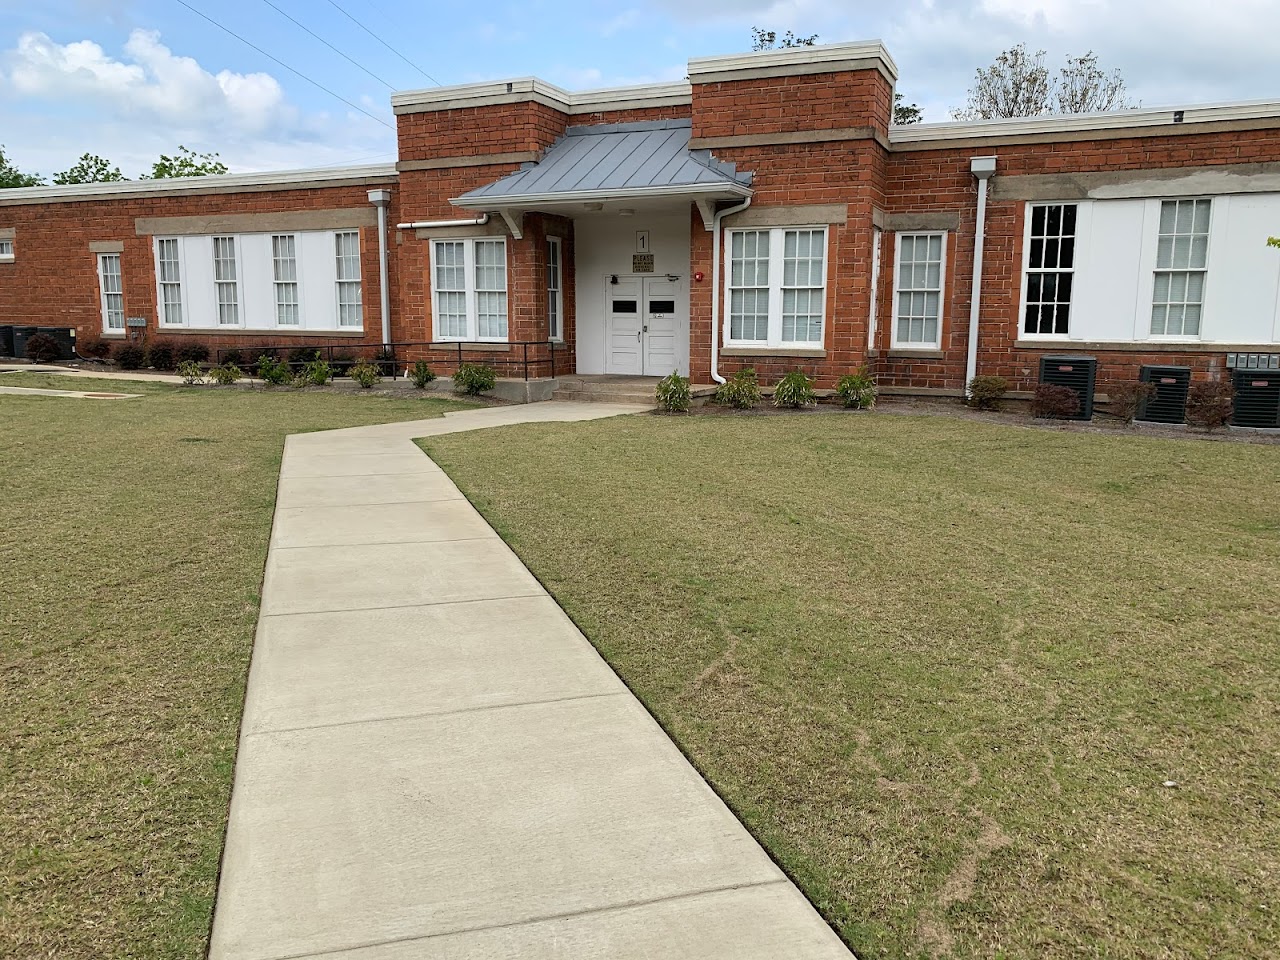 Photo of CLAFLIN SCHOOL. Affordable housing located at 1532 5TH AVENUE COLUMBUS, GA 31901